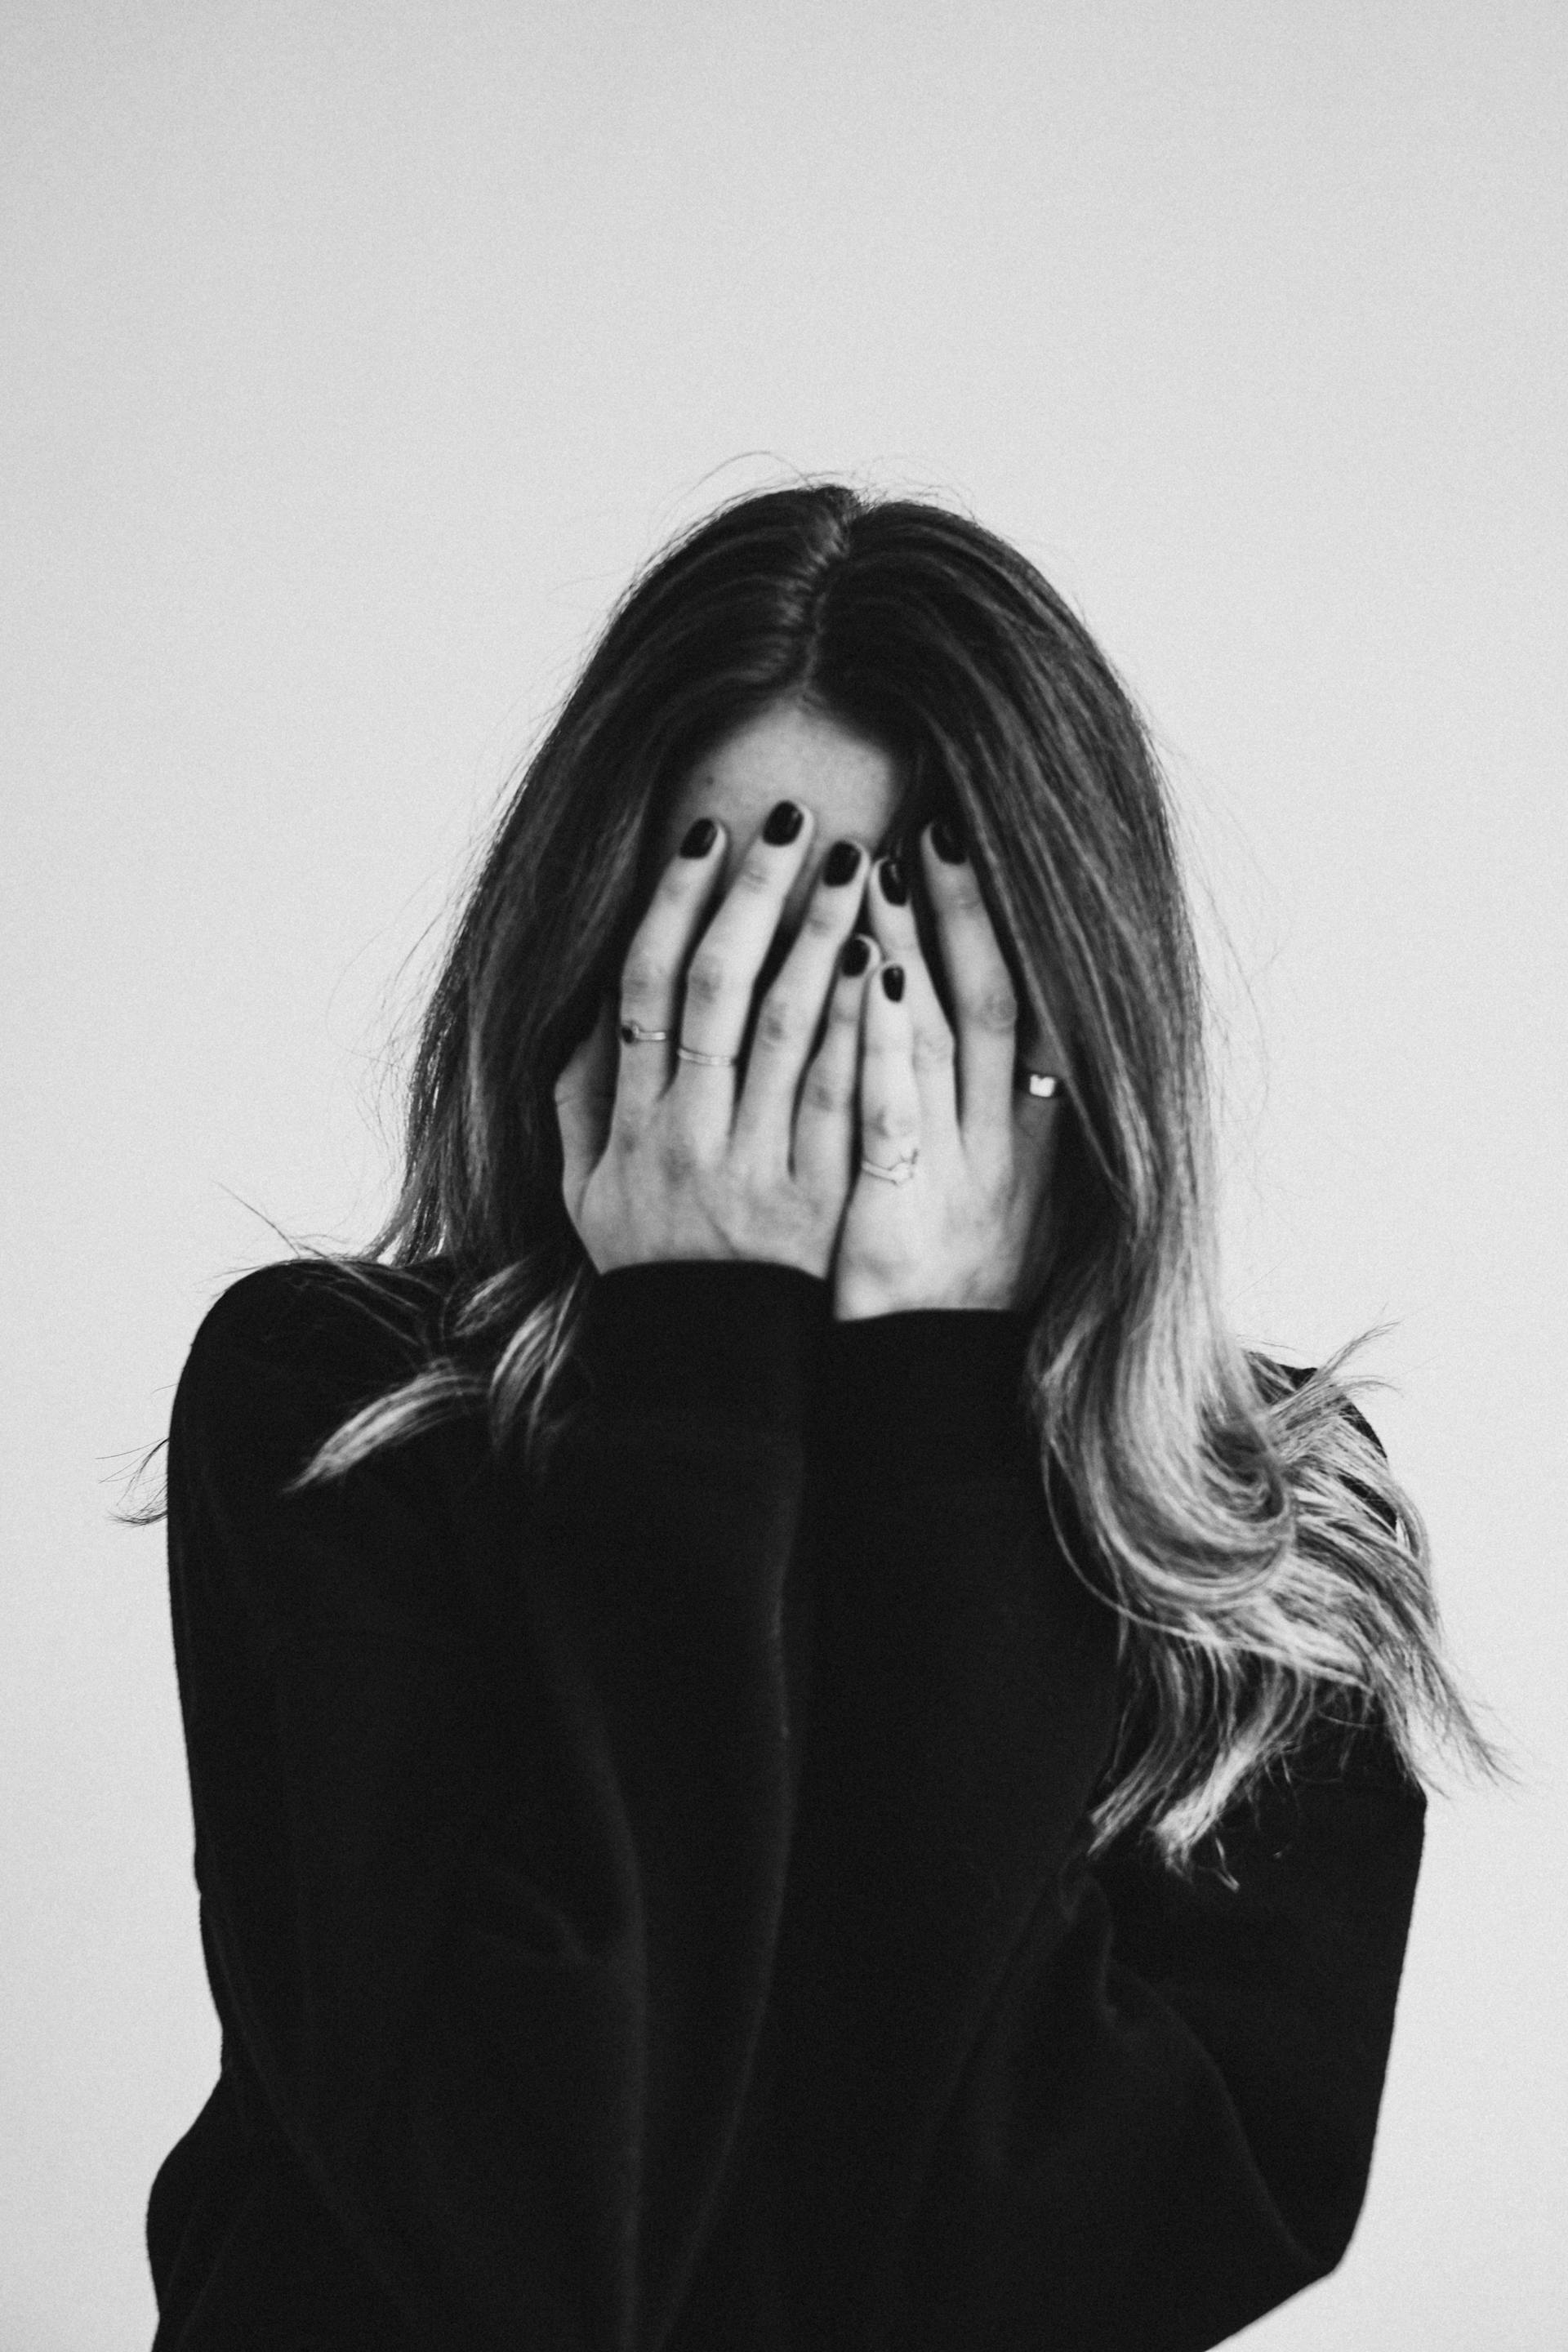 A sad woman covering her face | Source: Pexels